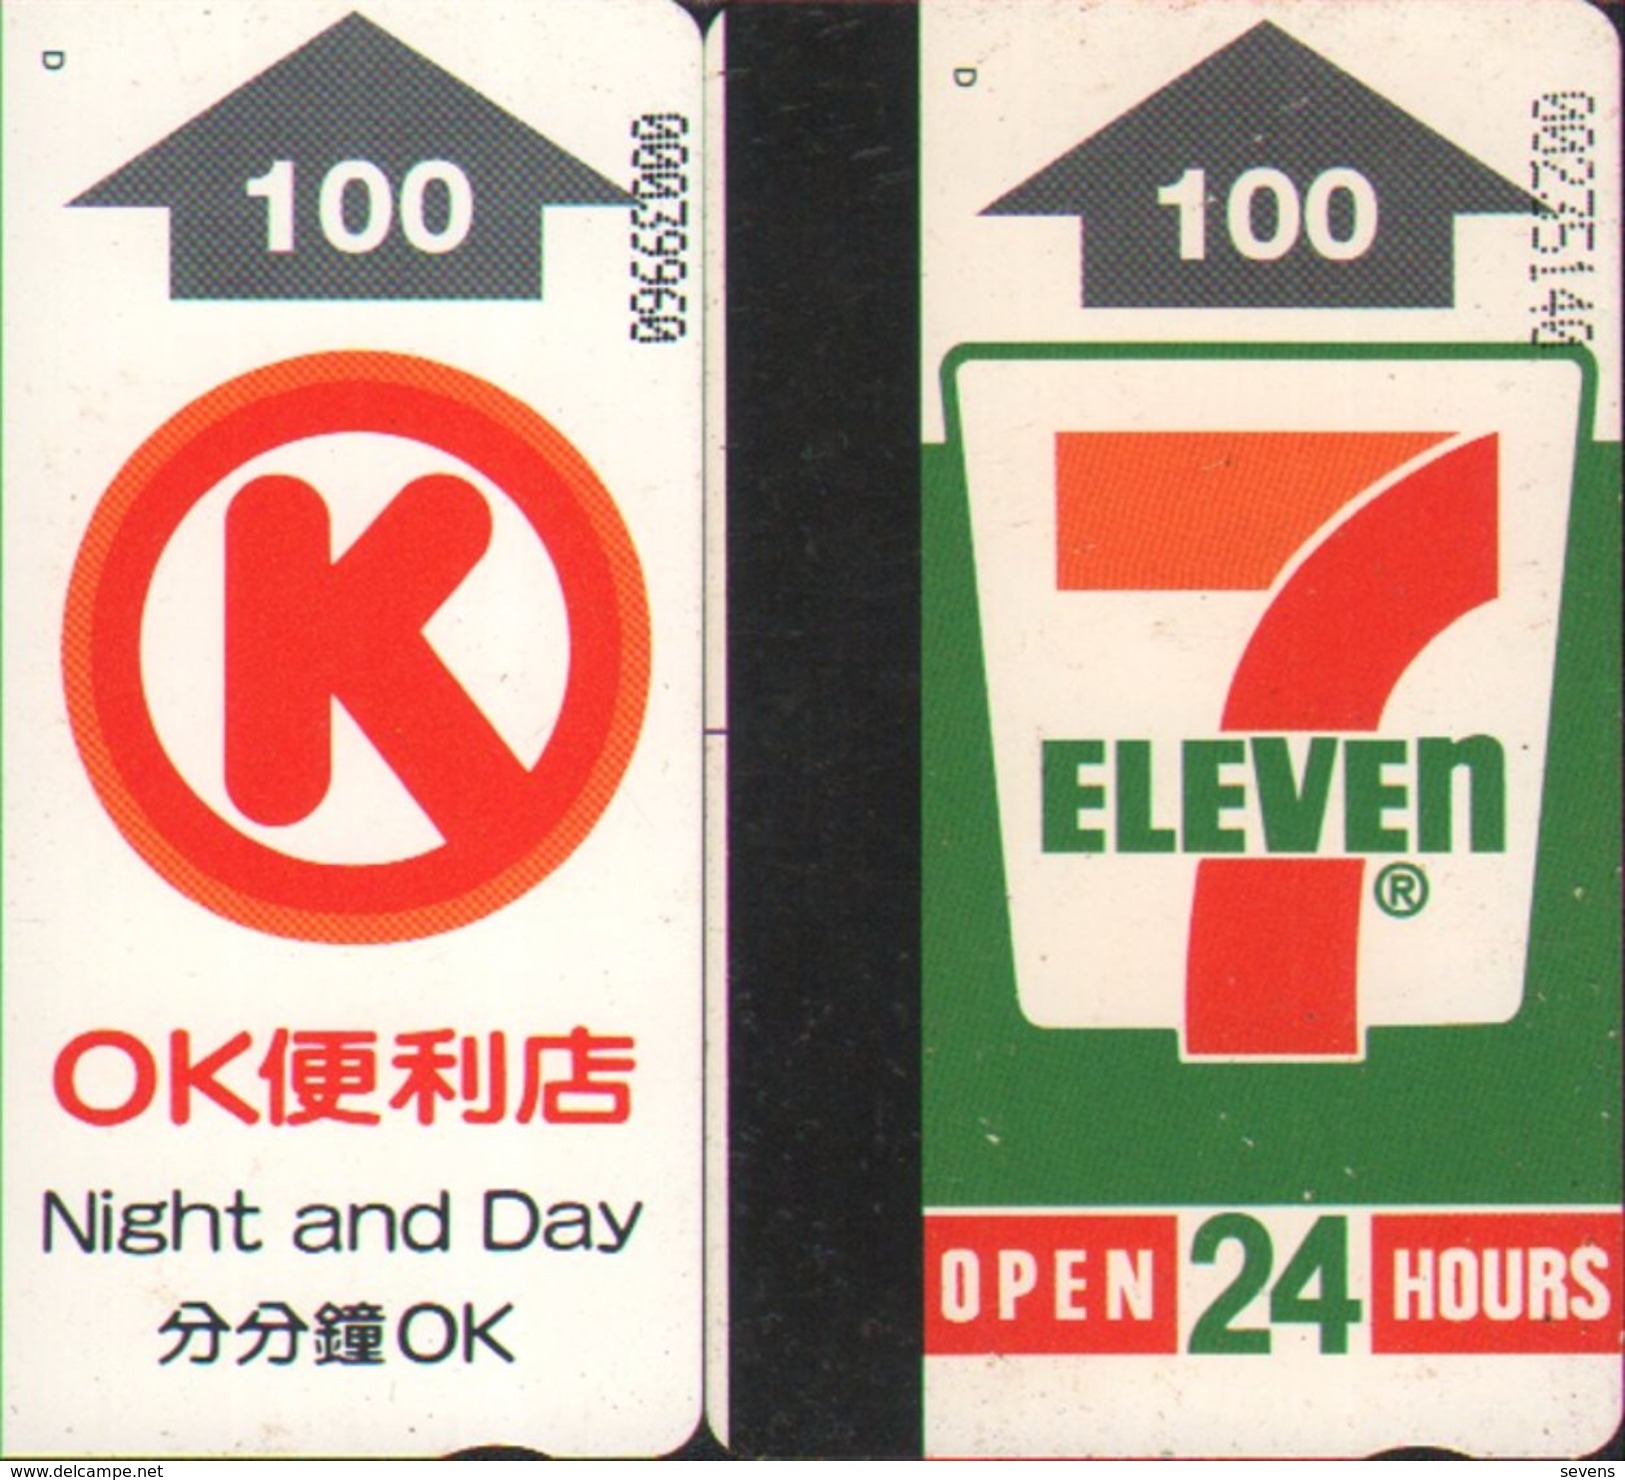 Definitive Autelca Phonecard,IDD To Phillippines,two Different Backside 7-Eleven And OK,used - Hong Kong